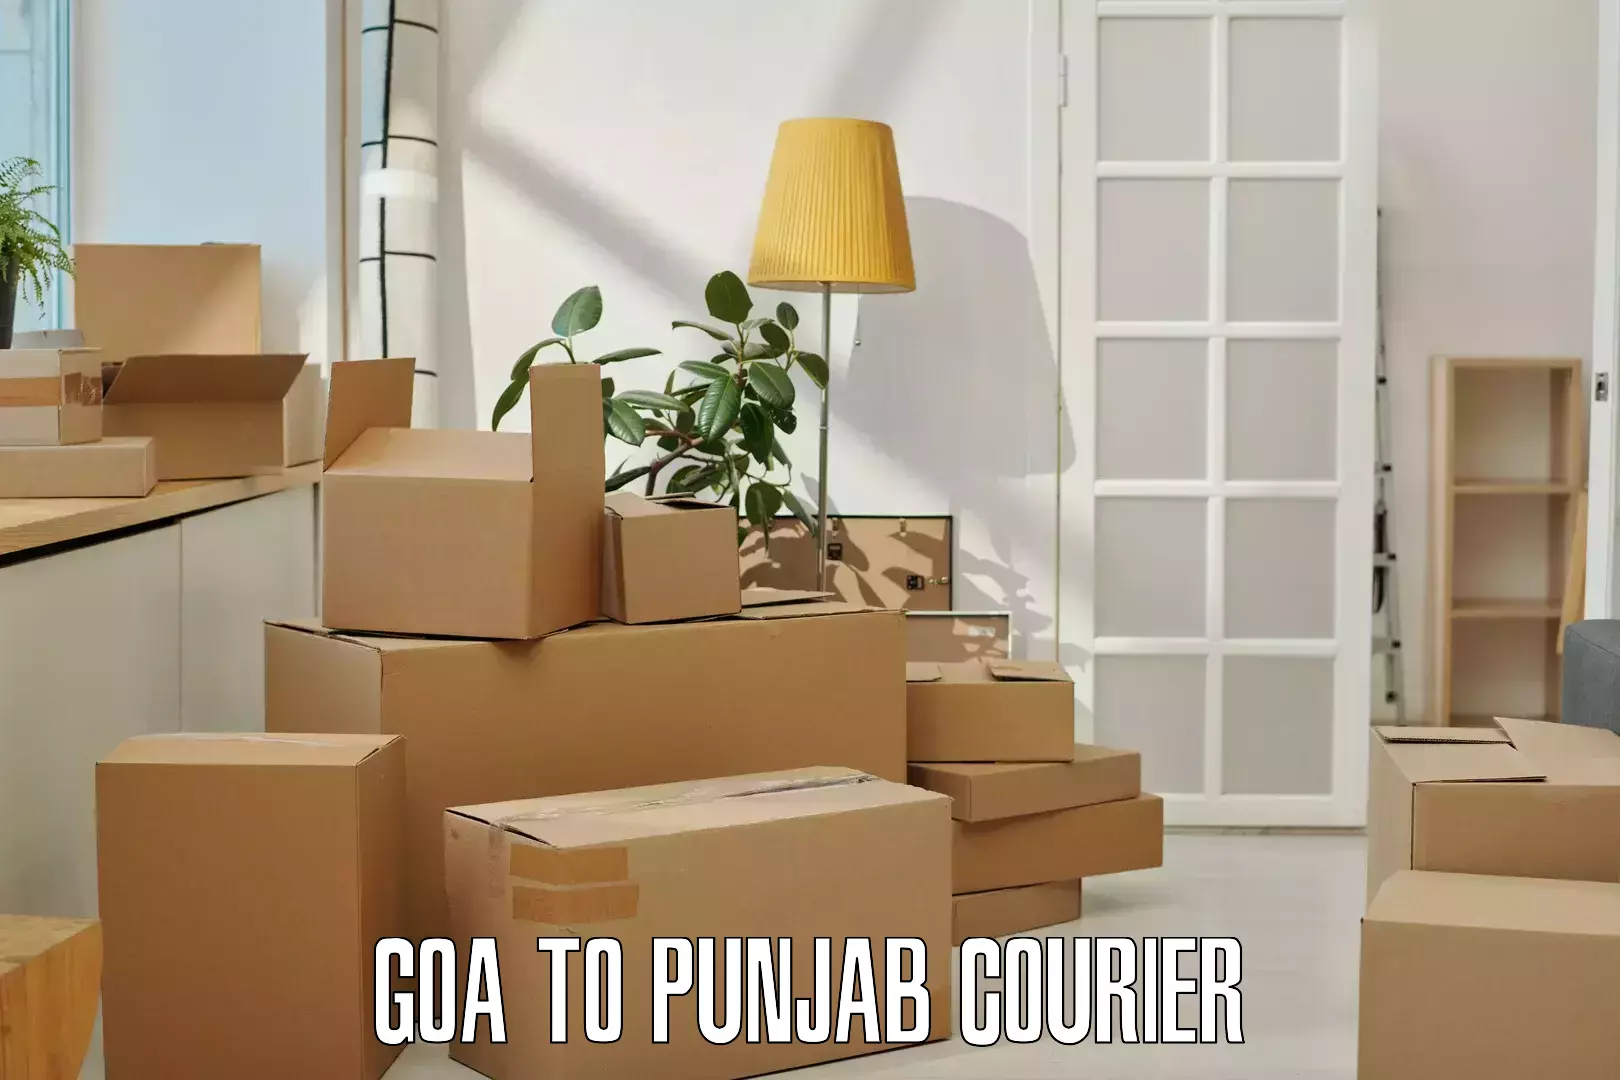 24-hour courier services Goa to Punjab